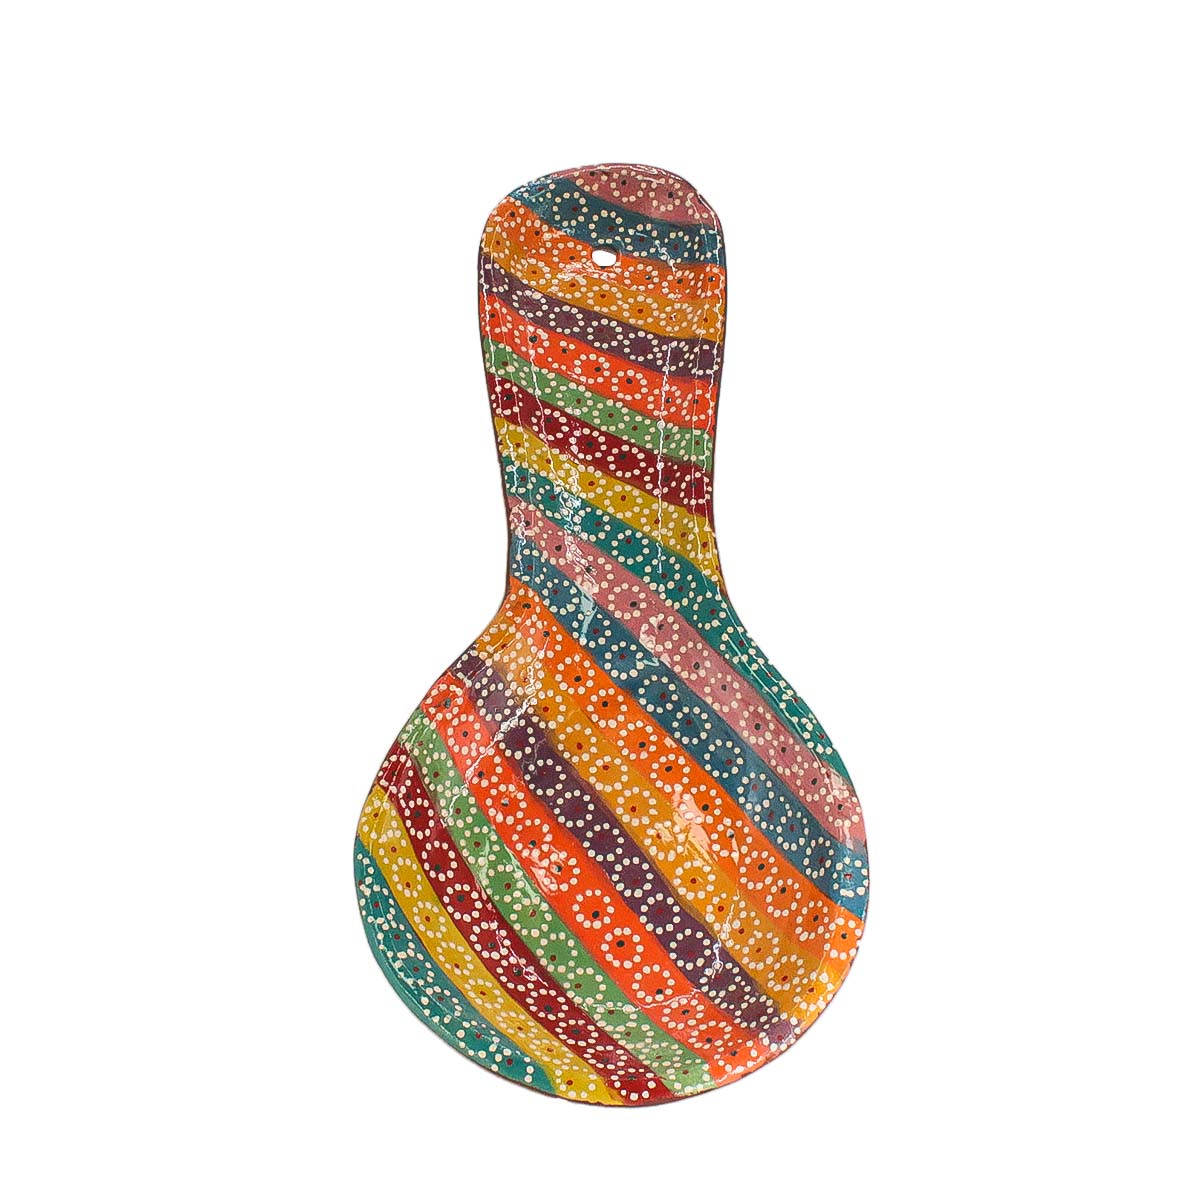 Capula Hand-Painted Spoon Rest - 6